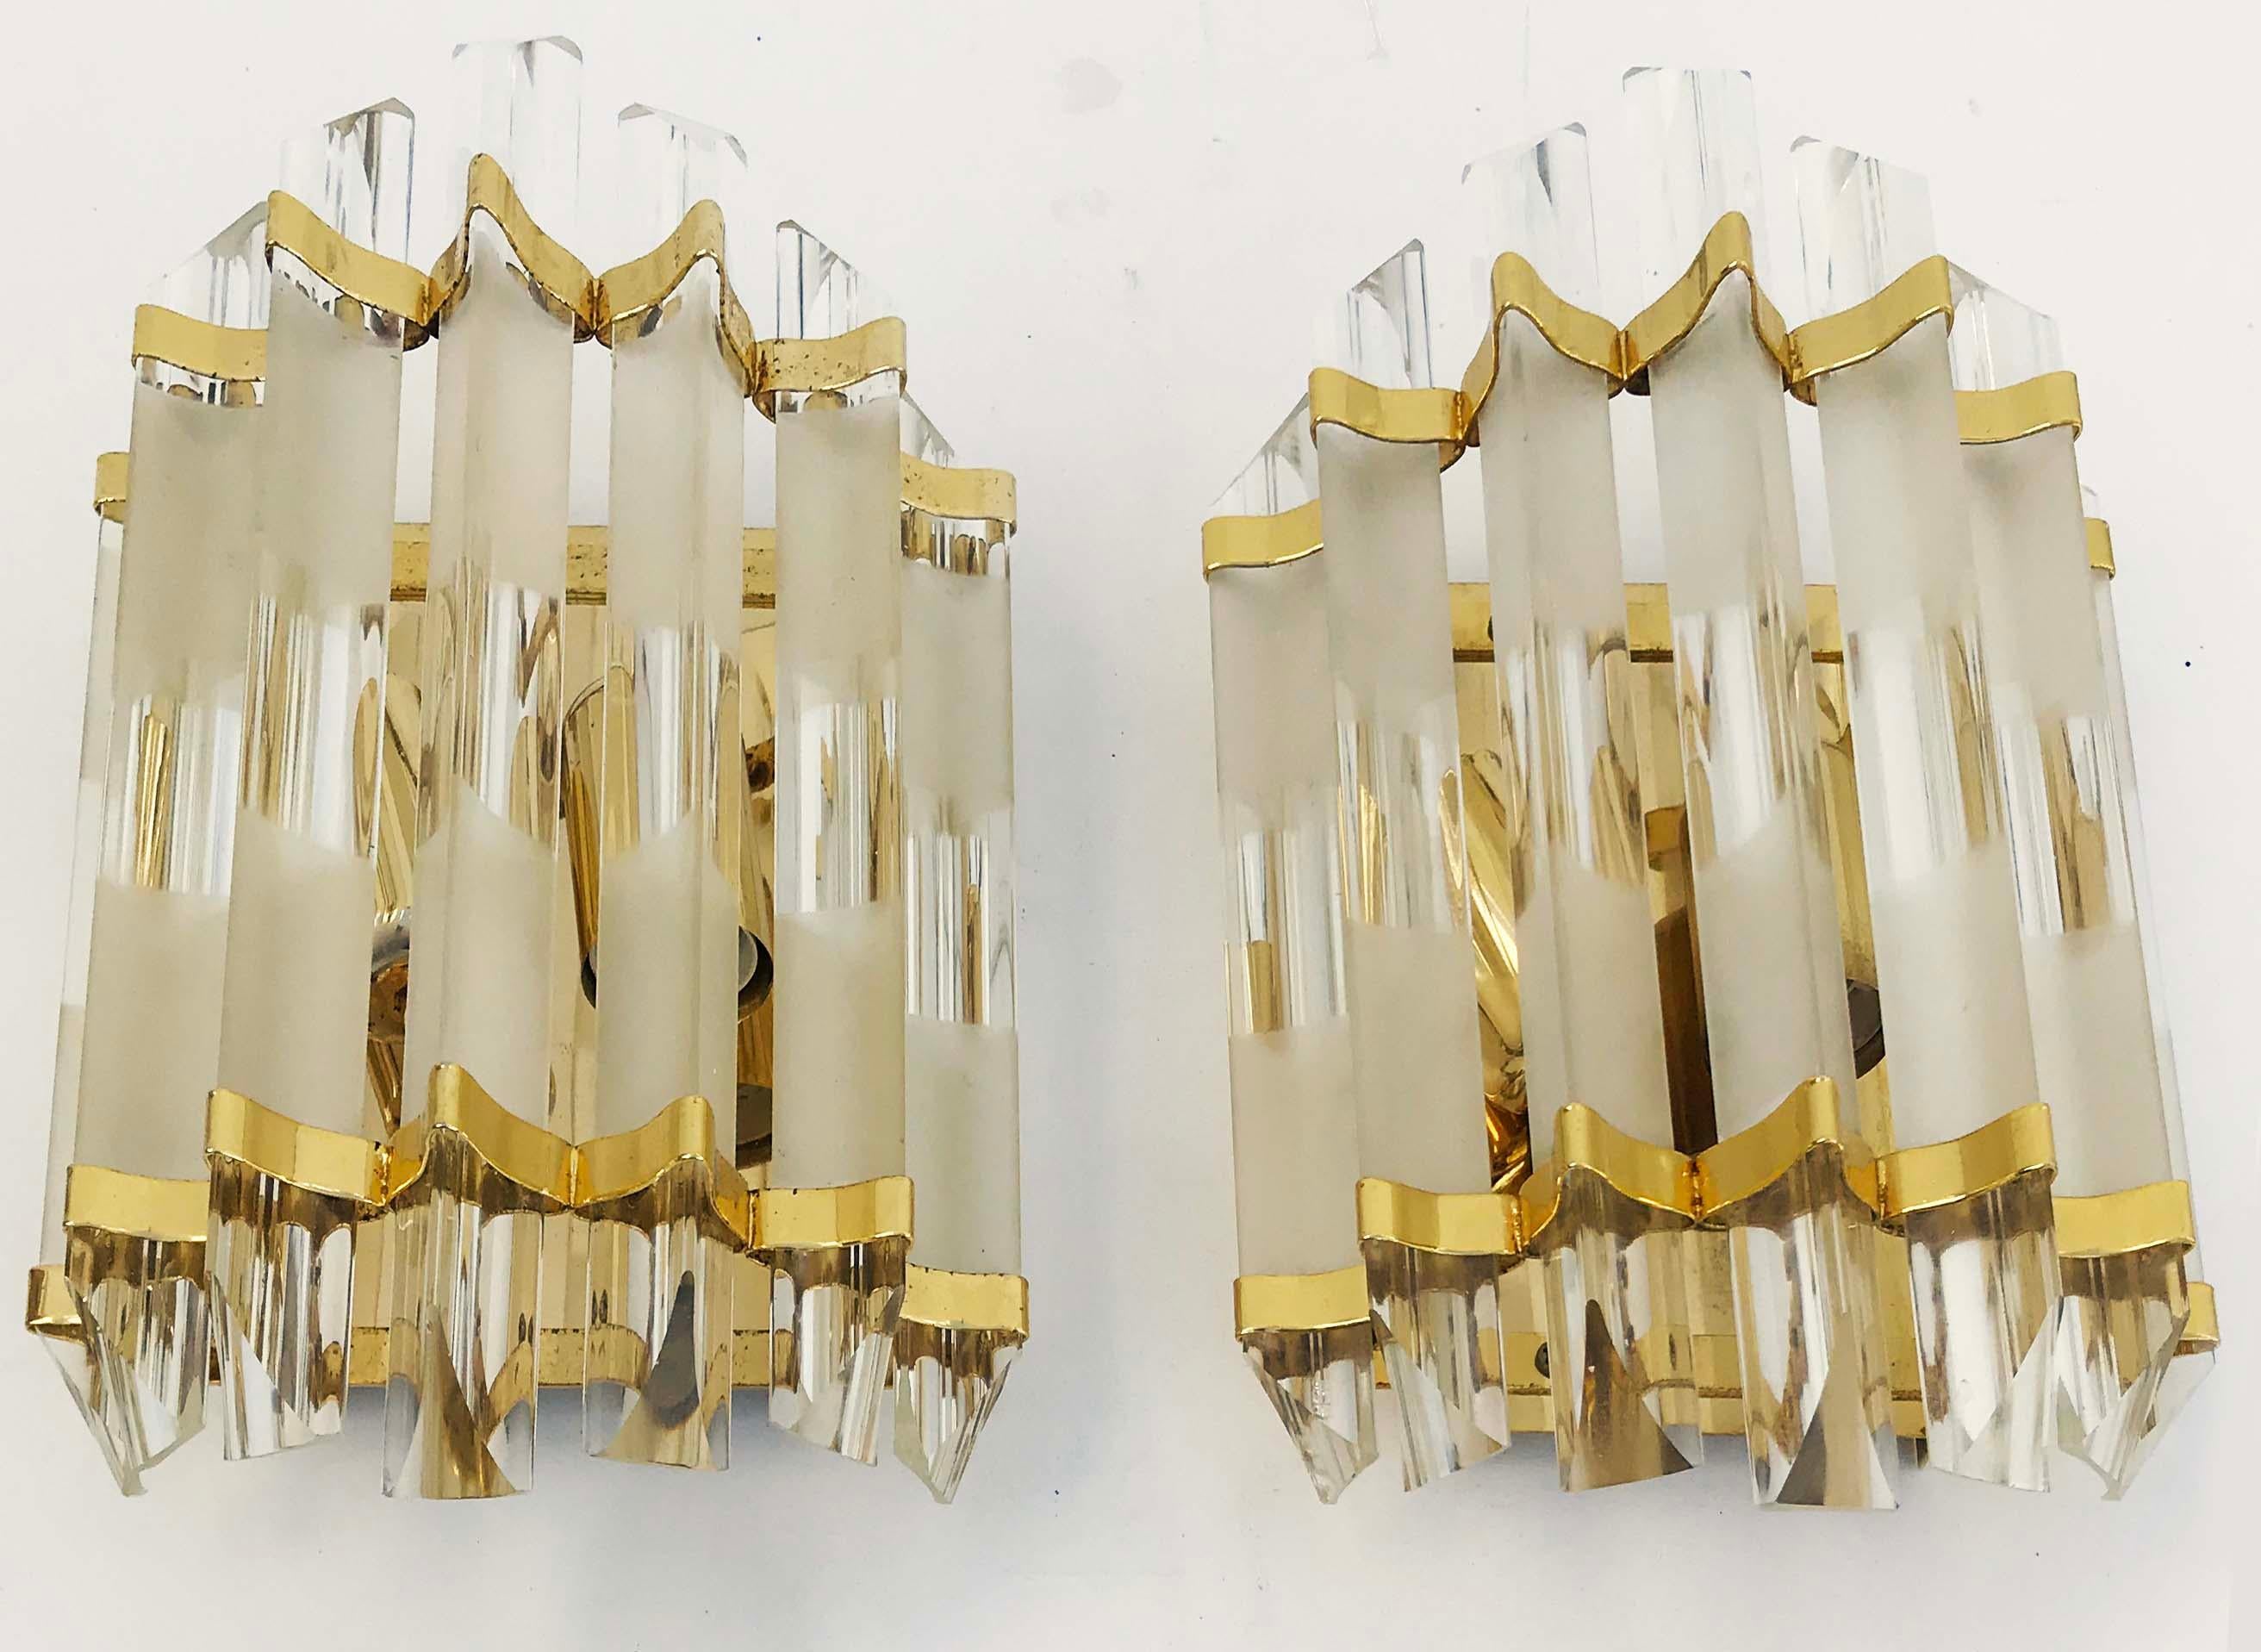 Superb pair of Murano sconces, frost and clear glass rod on a gilded gold color frame
2 light, 60 watts max bulb
US wired and in working condition. 
Measures: Back plate: 8